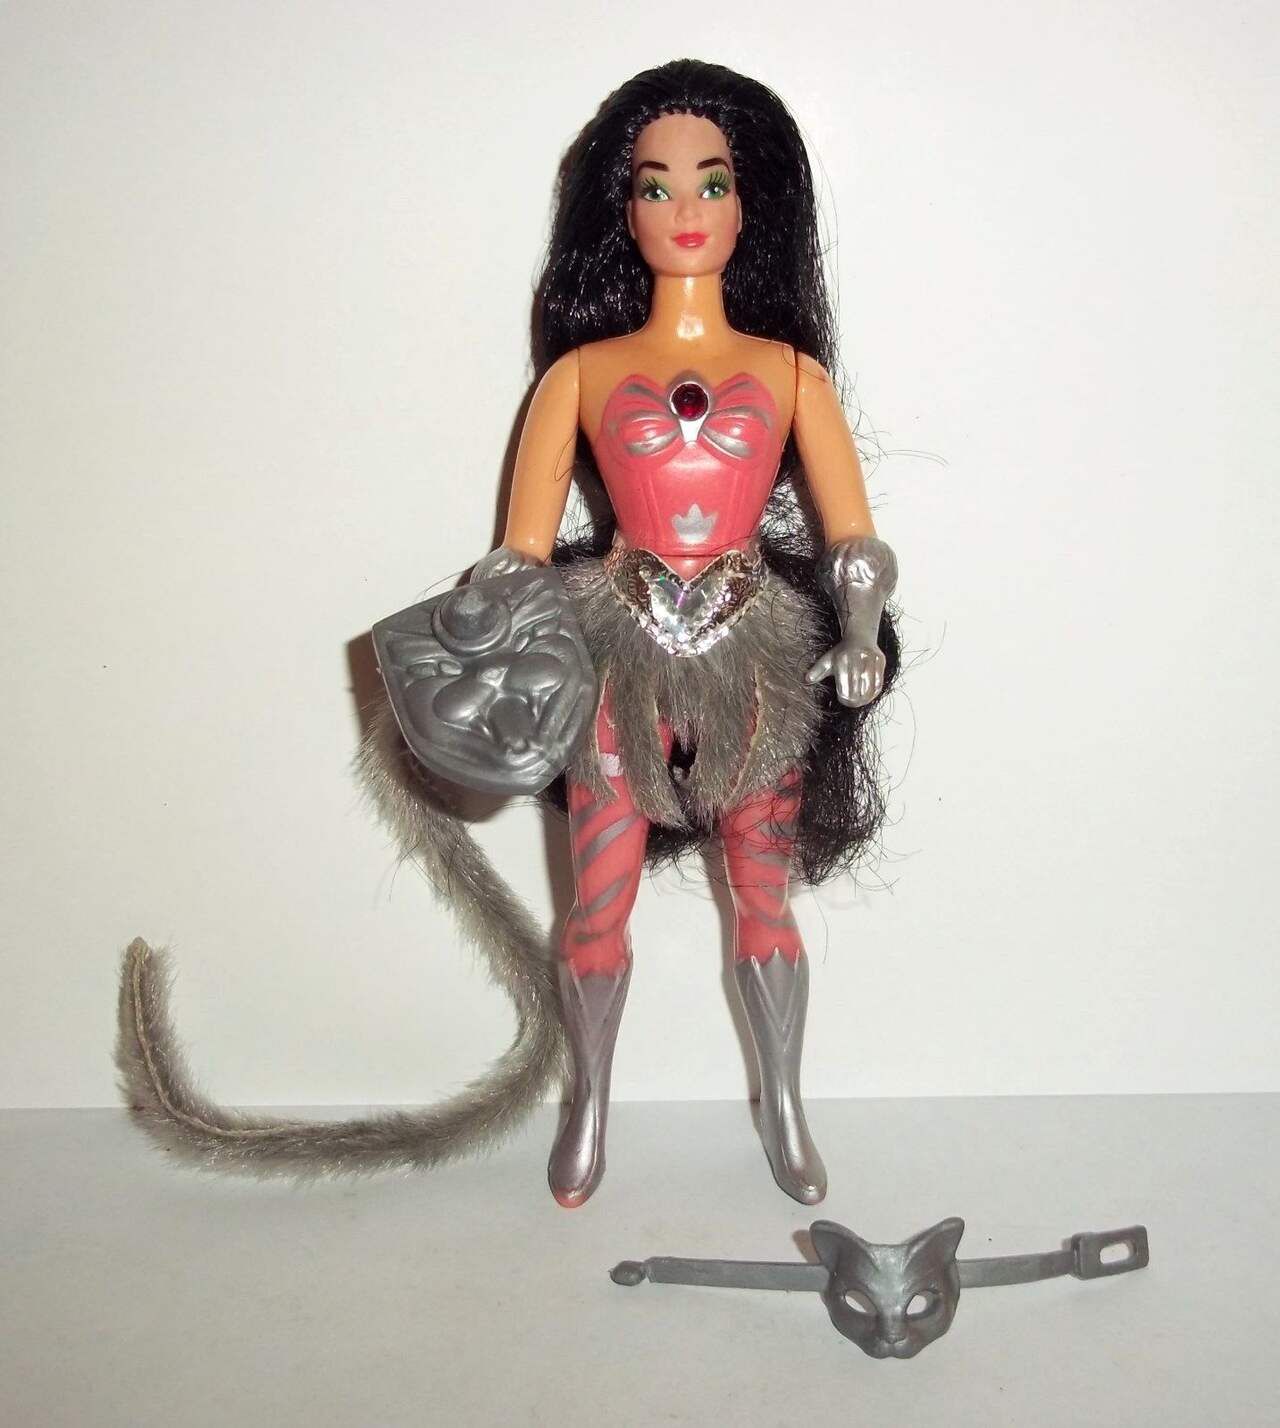 She-Ra: Princess of Power (1985) - (figures, dolls, toys and objects) 24